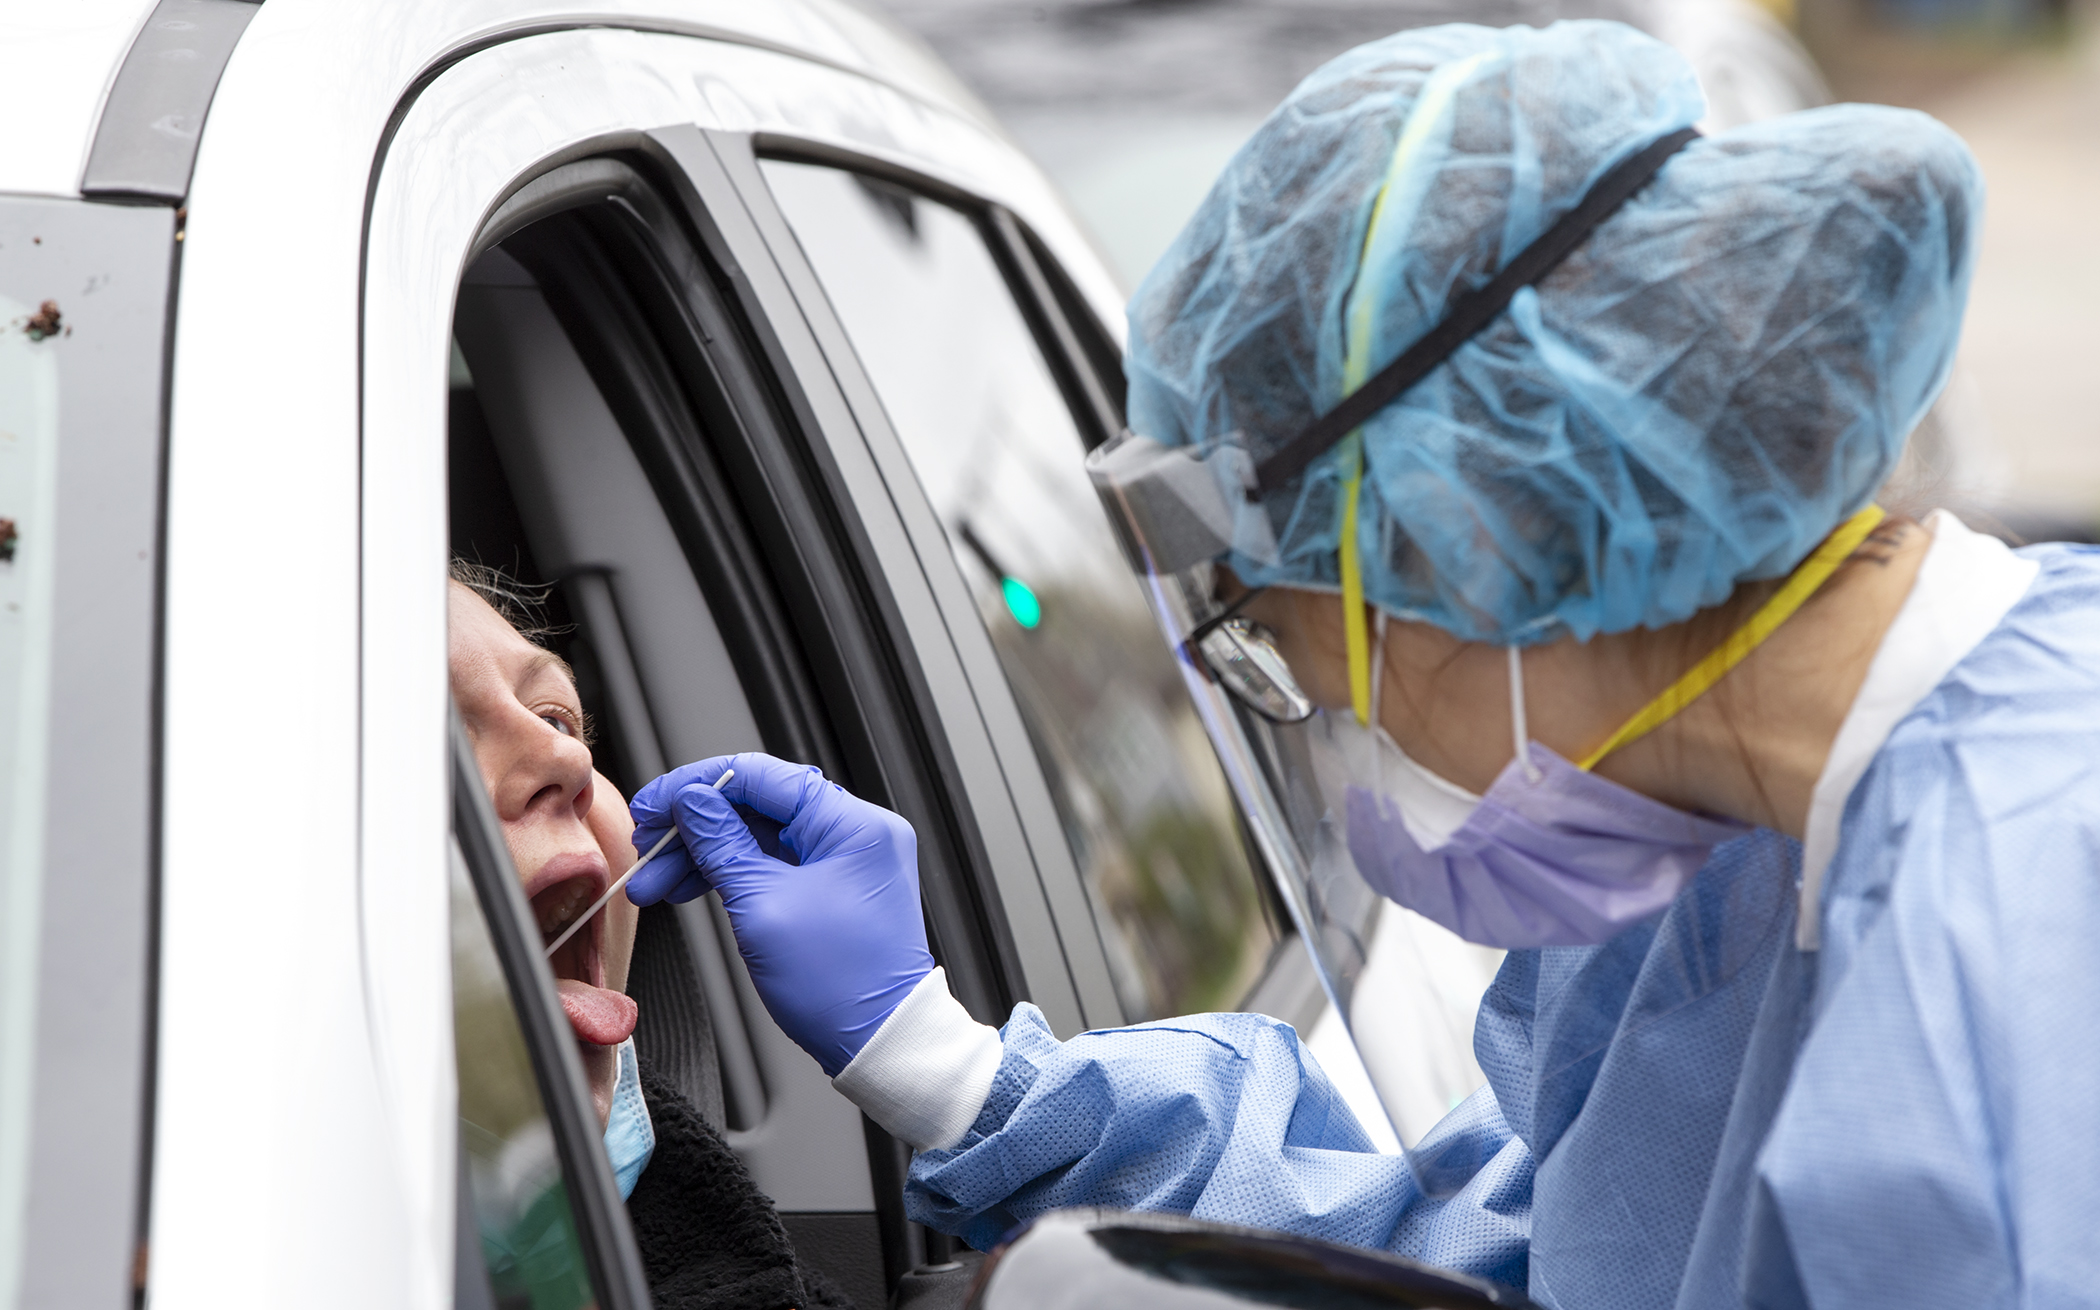 A health care worker administers a test at a drive-up COVID-19 testing site in Minneapolis last April. Photo by Paul Battaglia